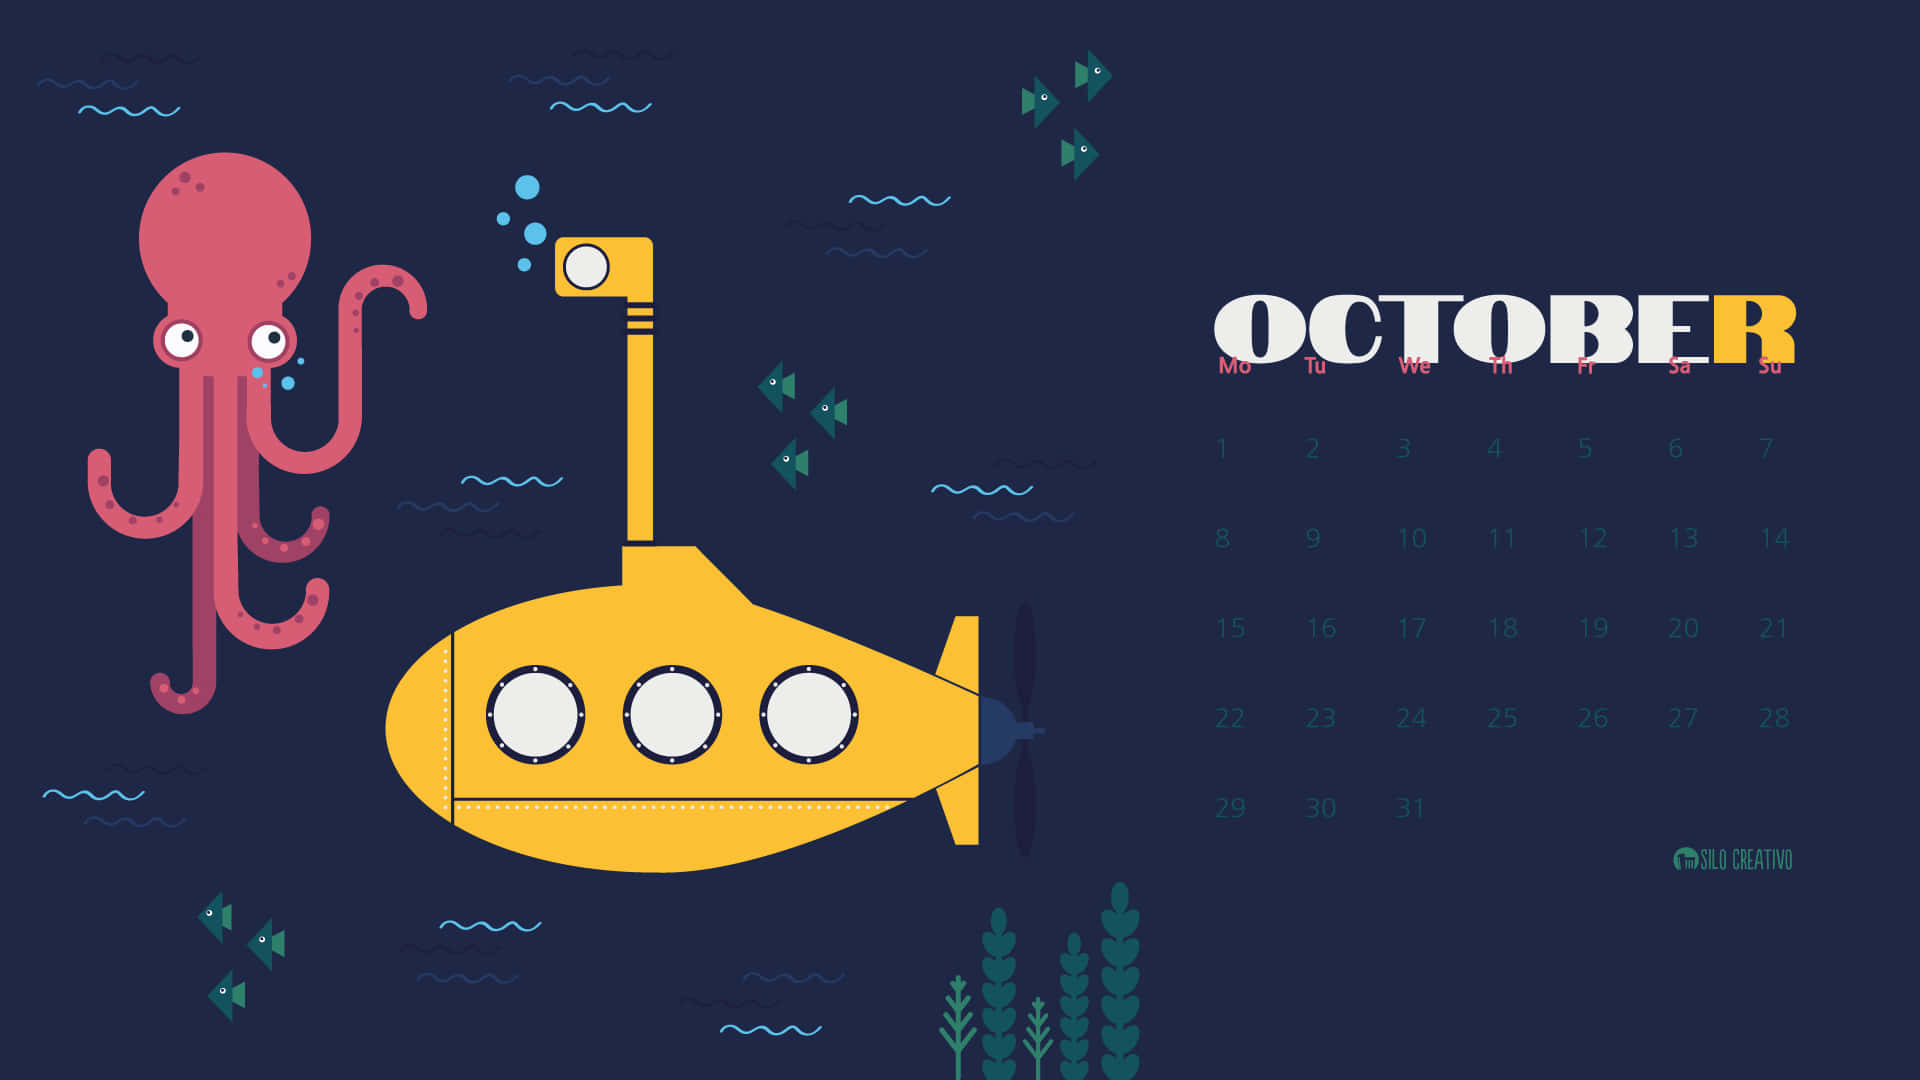 October Wallpaper With A Submarine And Octopus Wallpaper